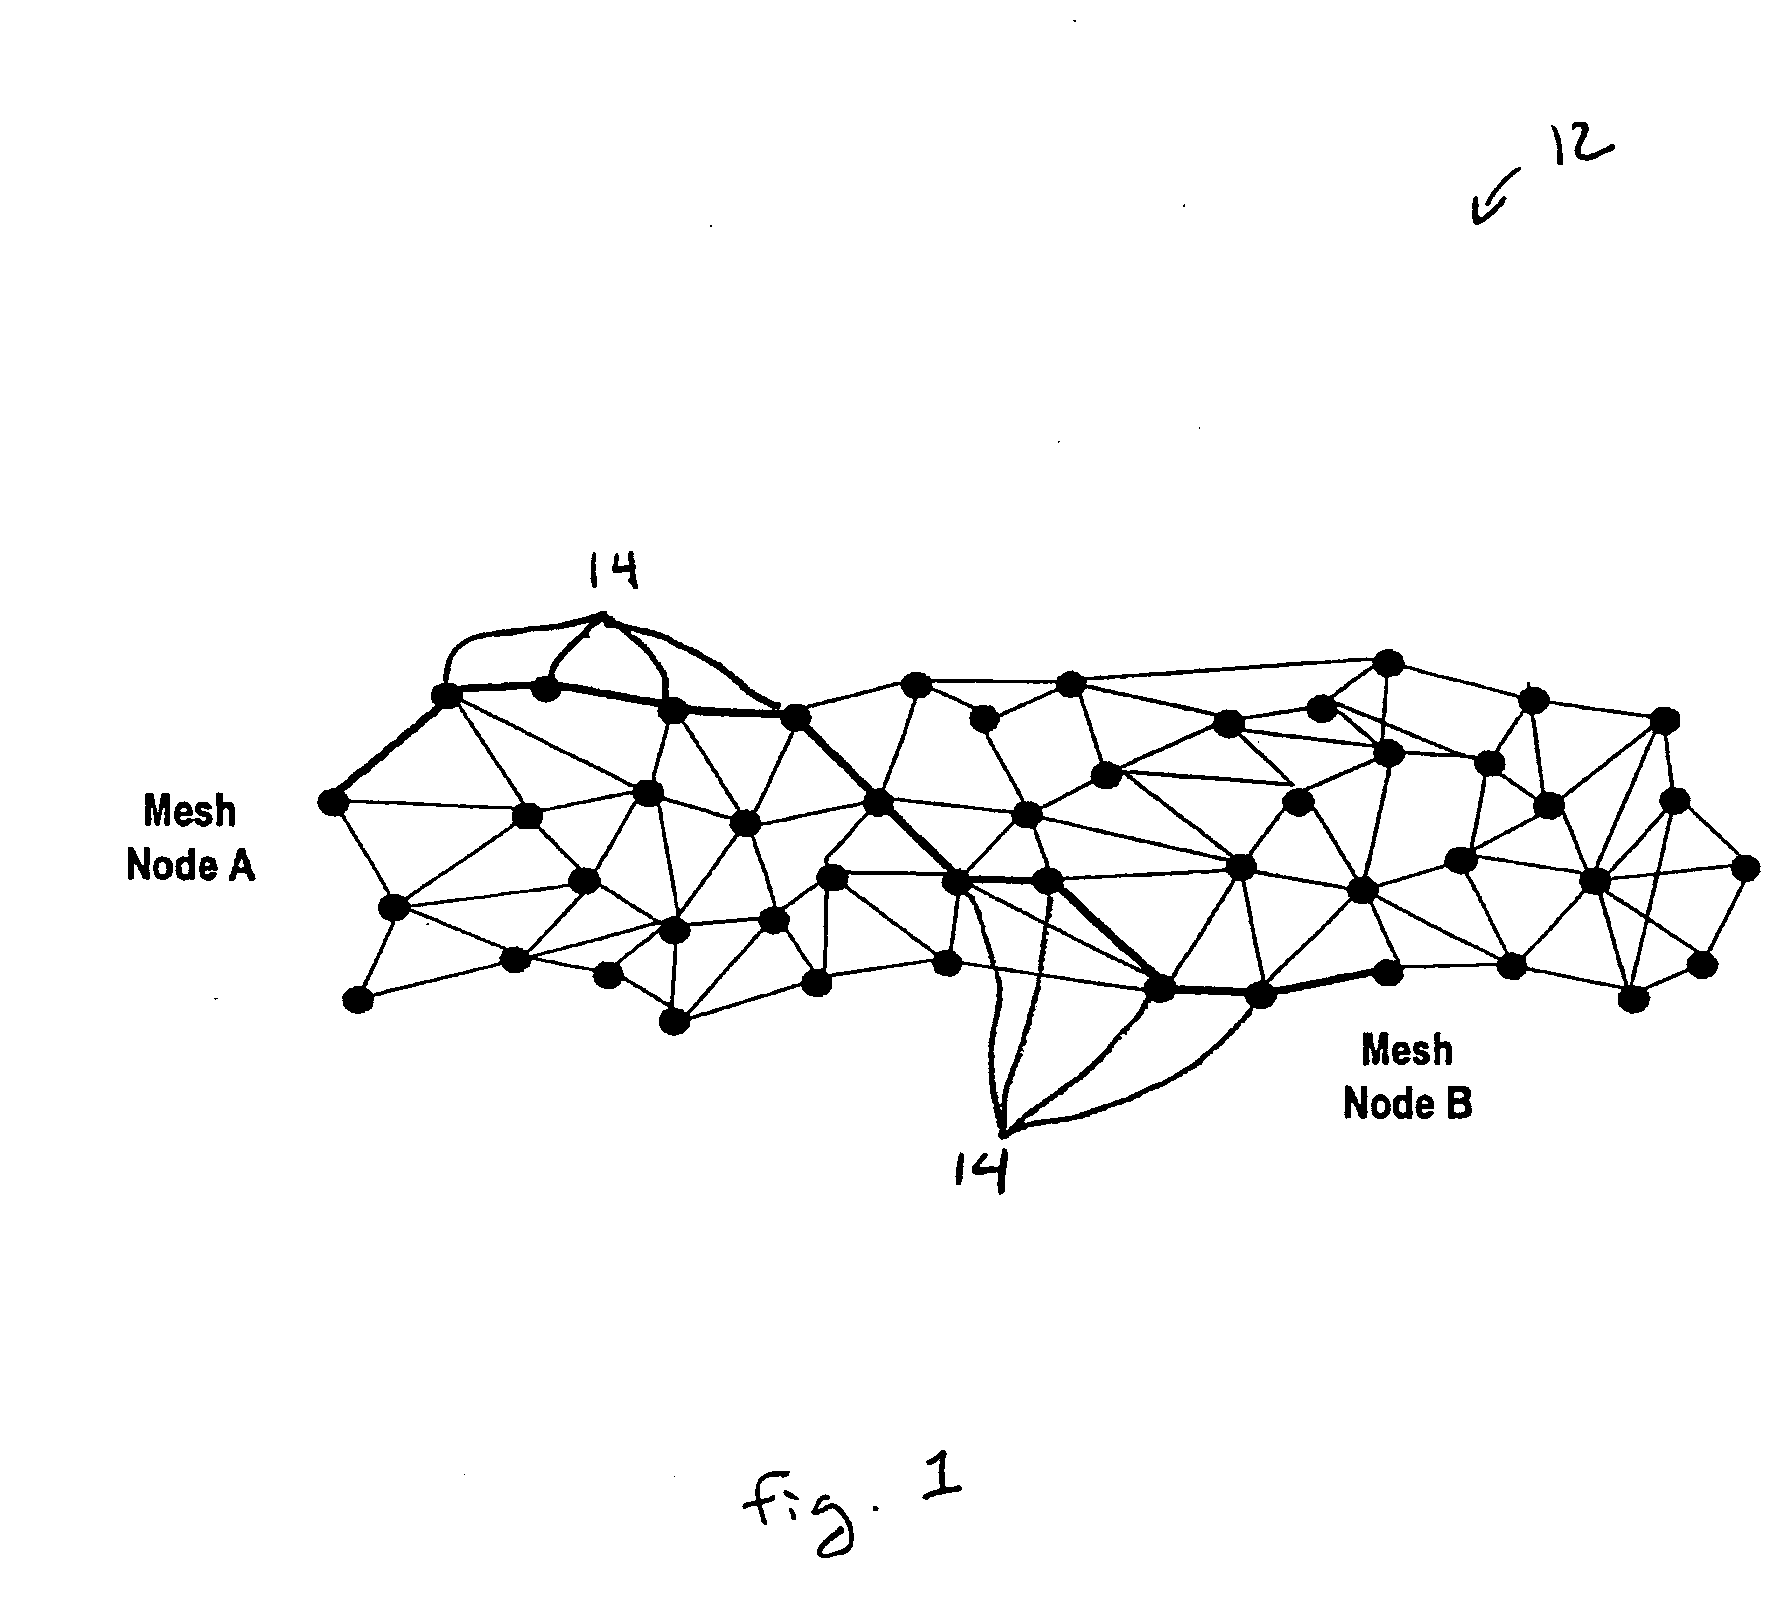 Reliable message distribution in an ad hoc mesh network